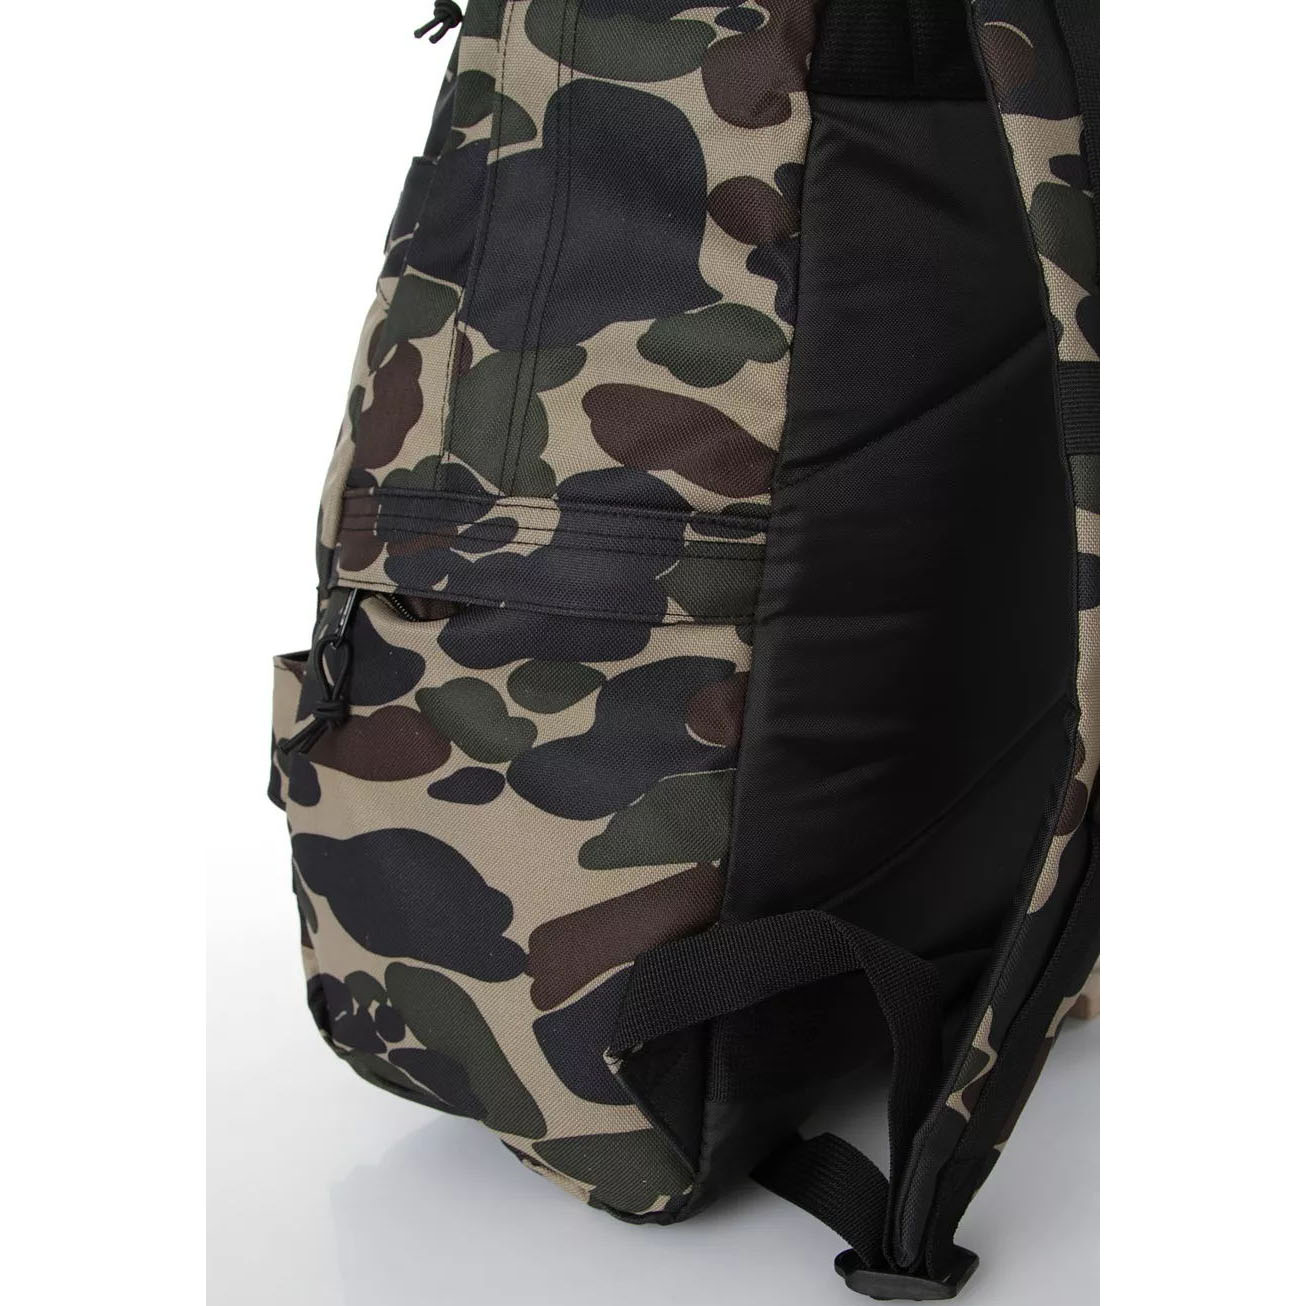 Outdoor Sport Tactical Gear Durable Camo Hiking Backpack Travel Bag